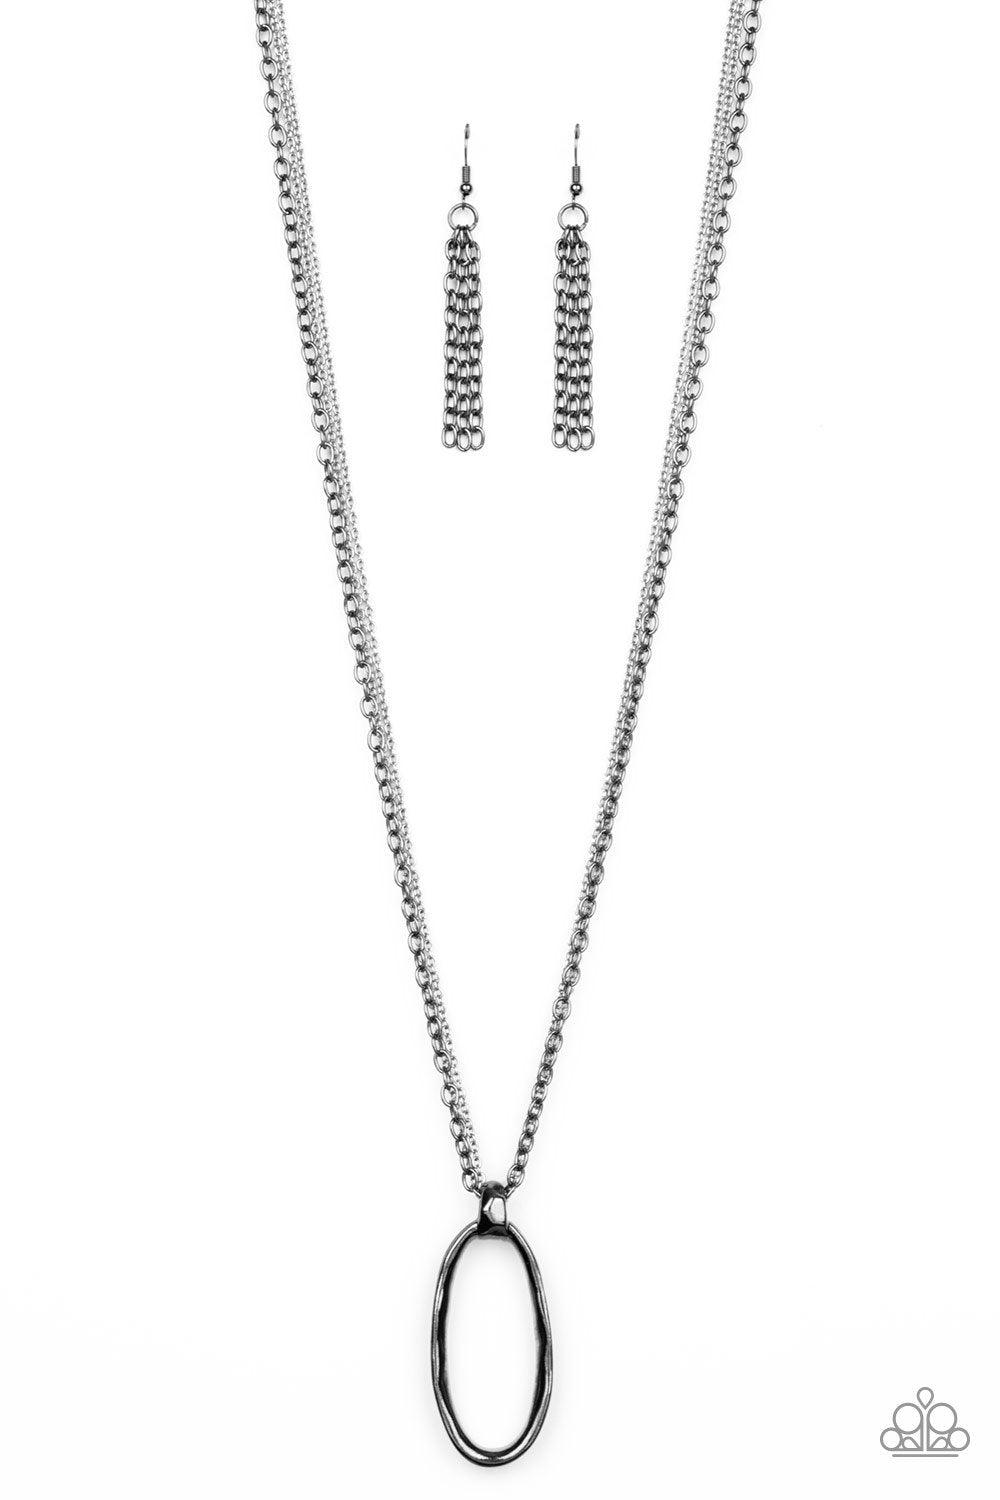 Industrial Confidence Gunmetal and Silver Necklace - Paparazzi Accessories-CarasShop.com - $5 Jewelry by Cara Jewels